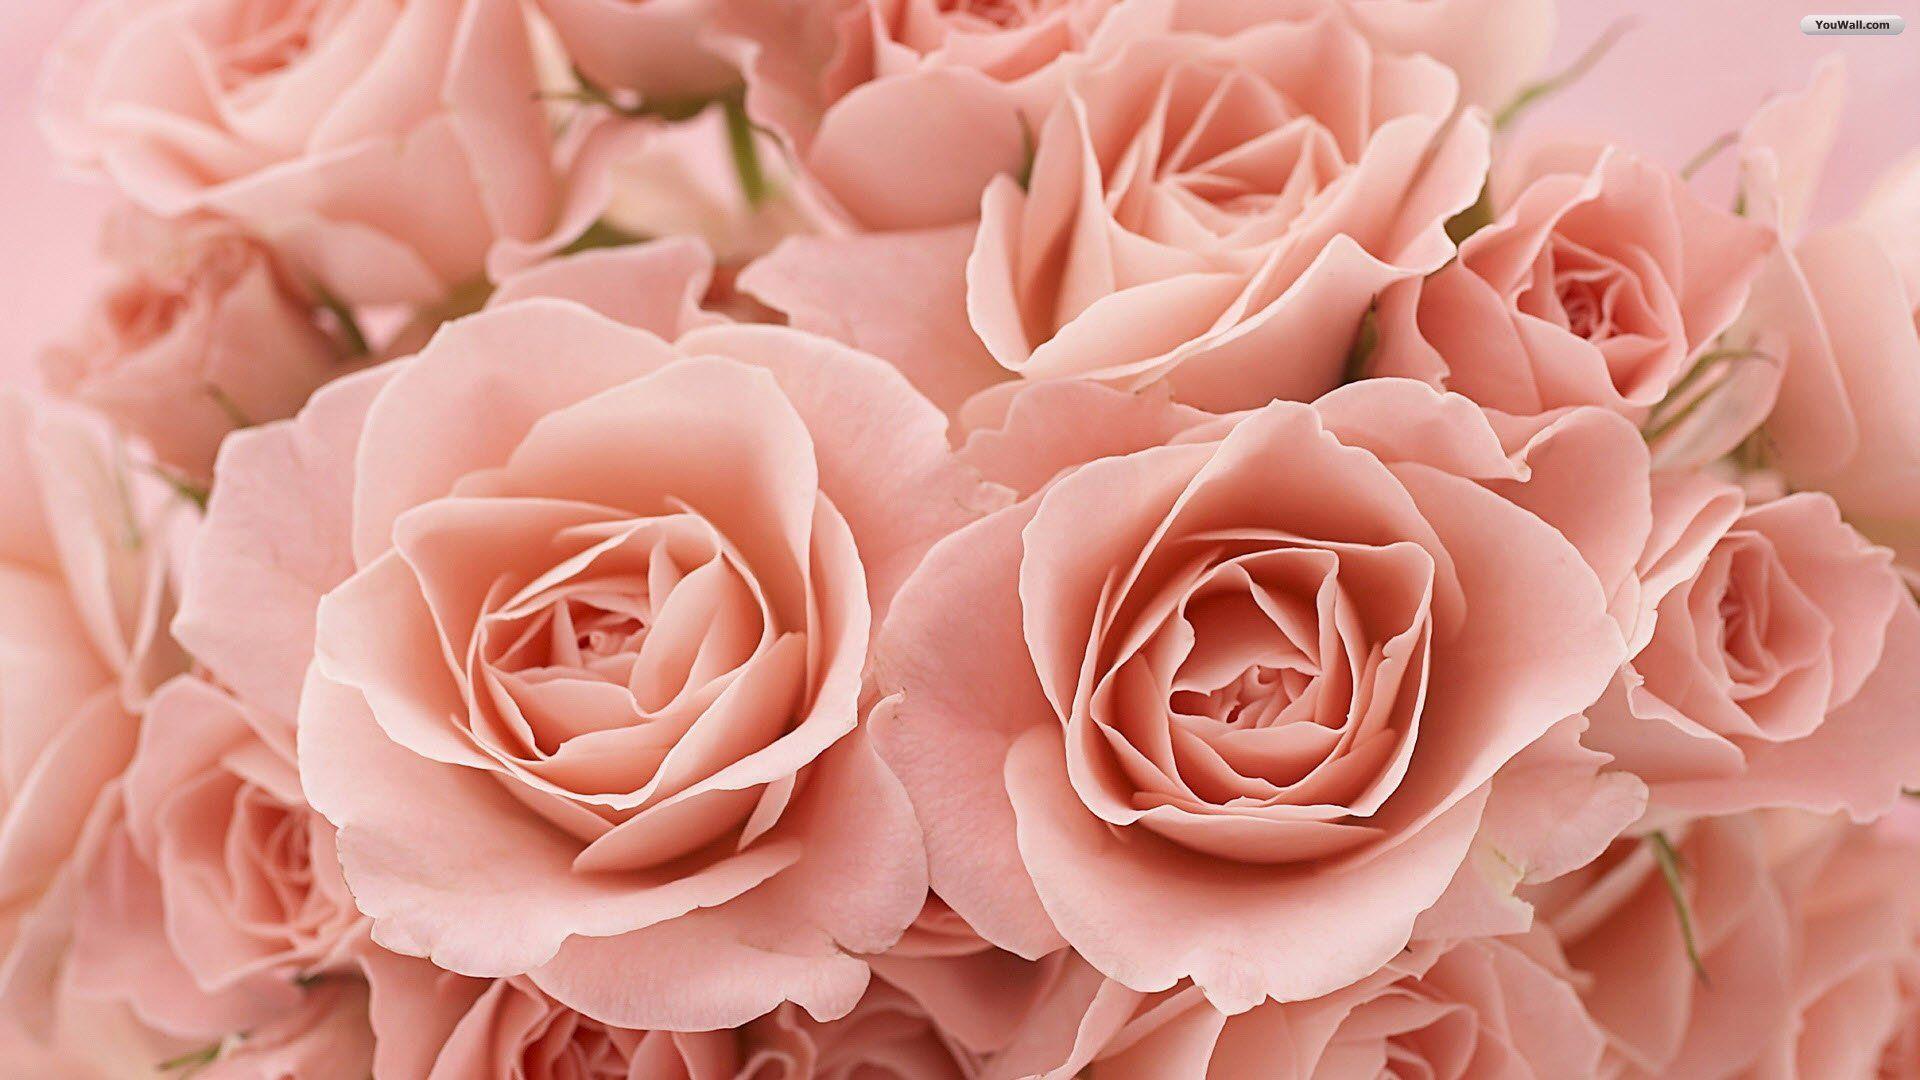 new rose types pink roses, Flowers, Pink rose flower